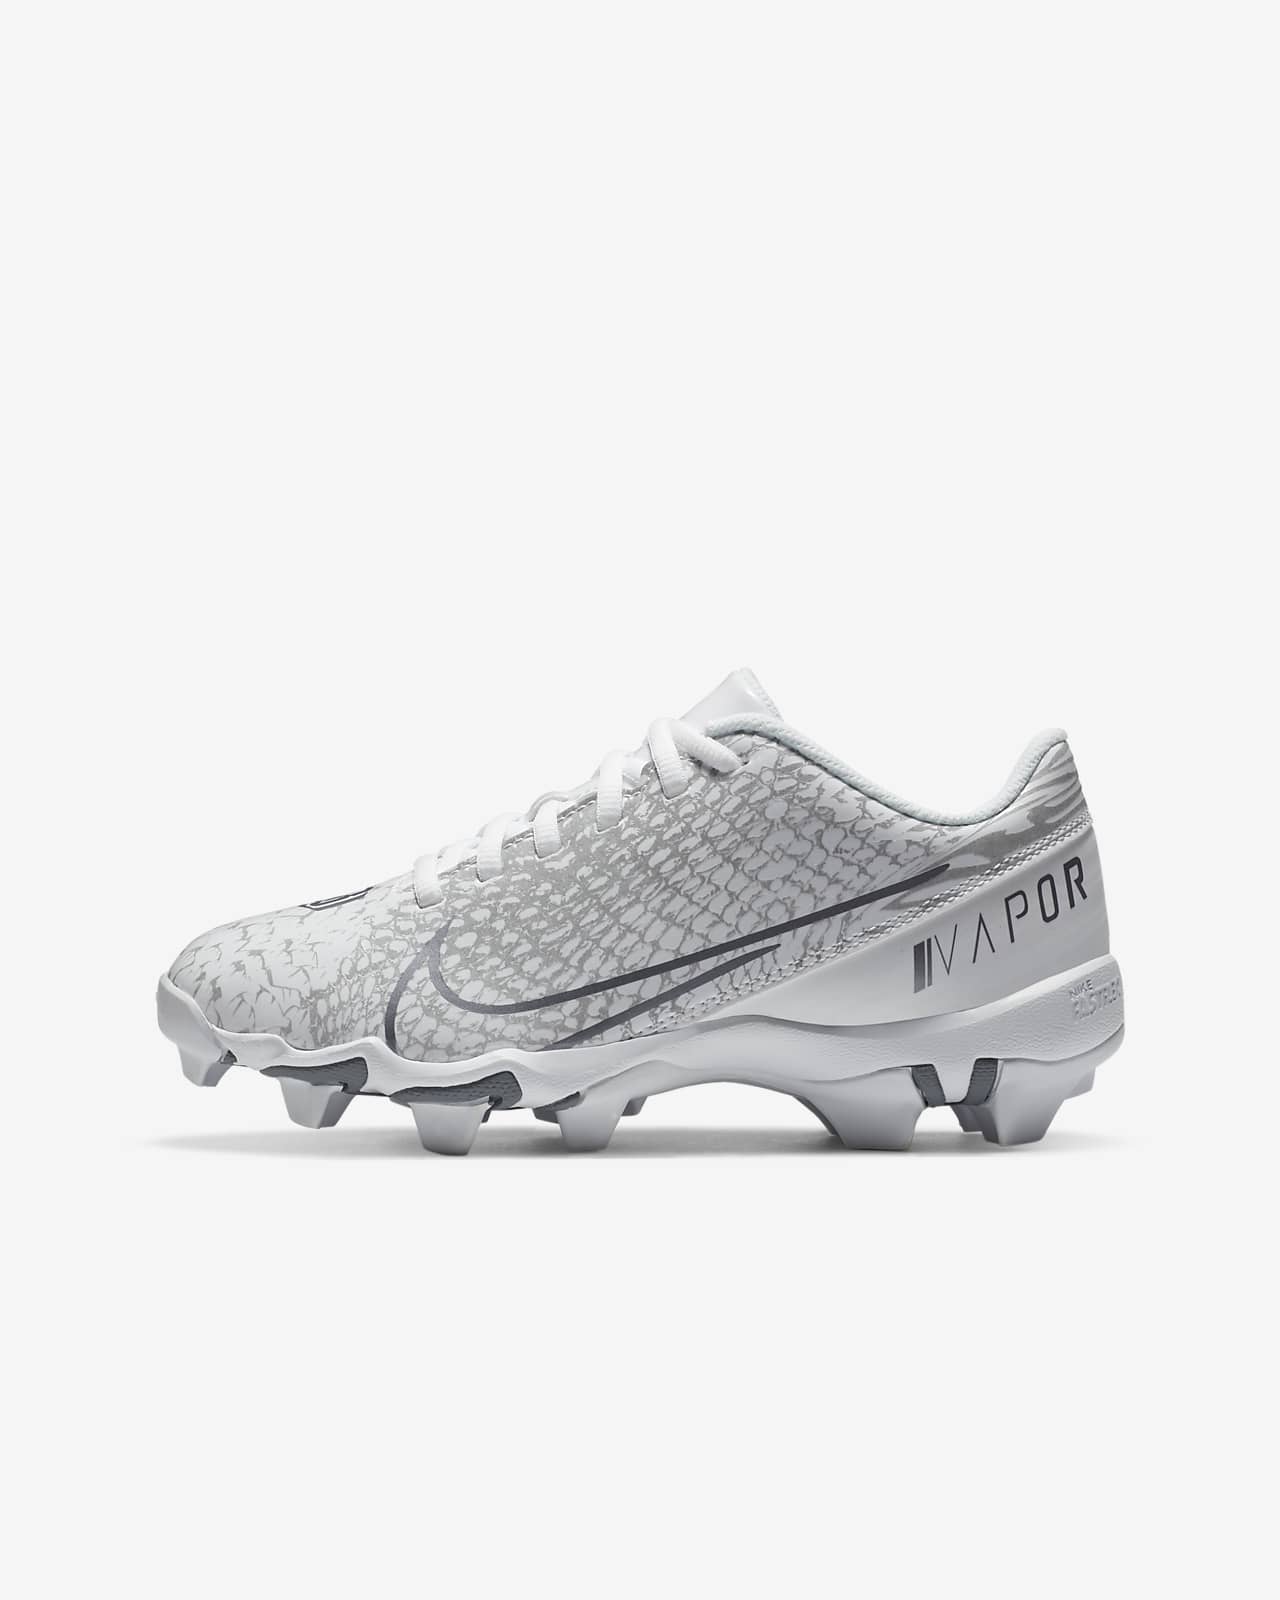 size 13 youth football cleats